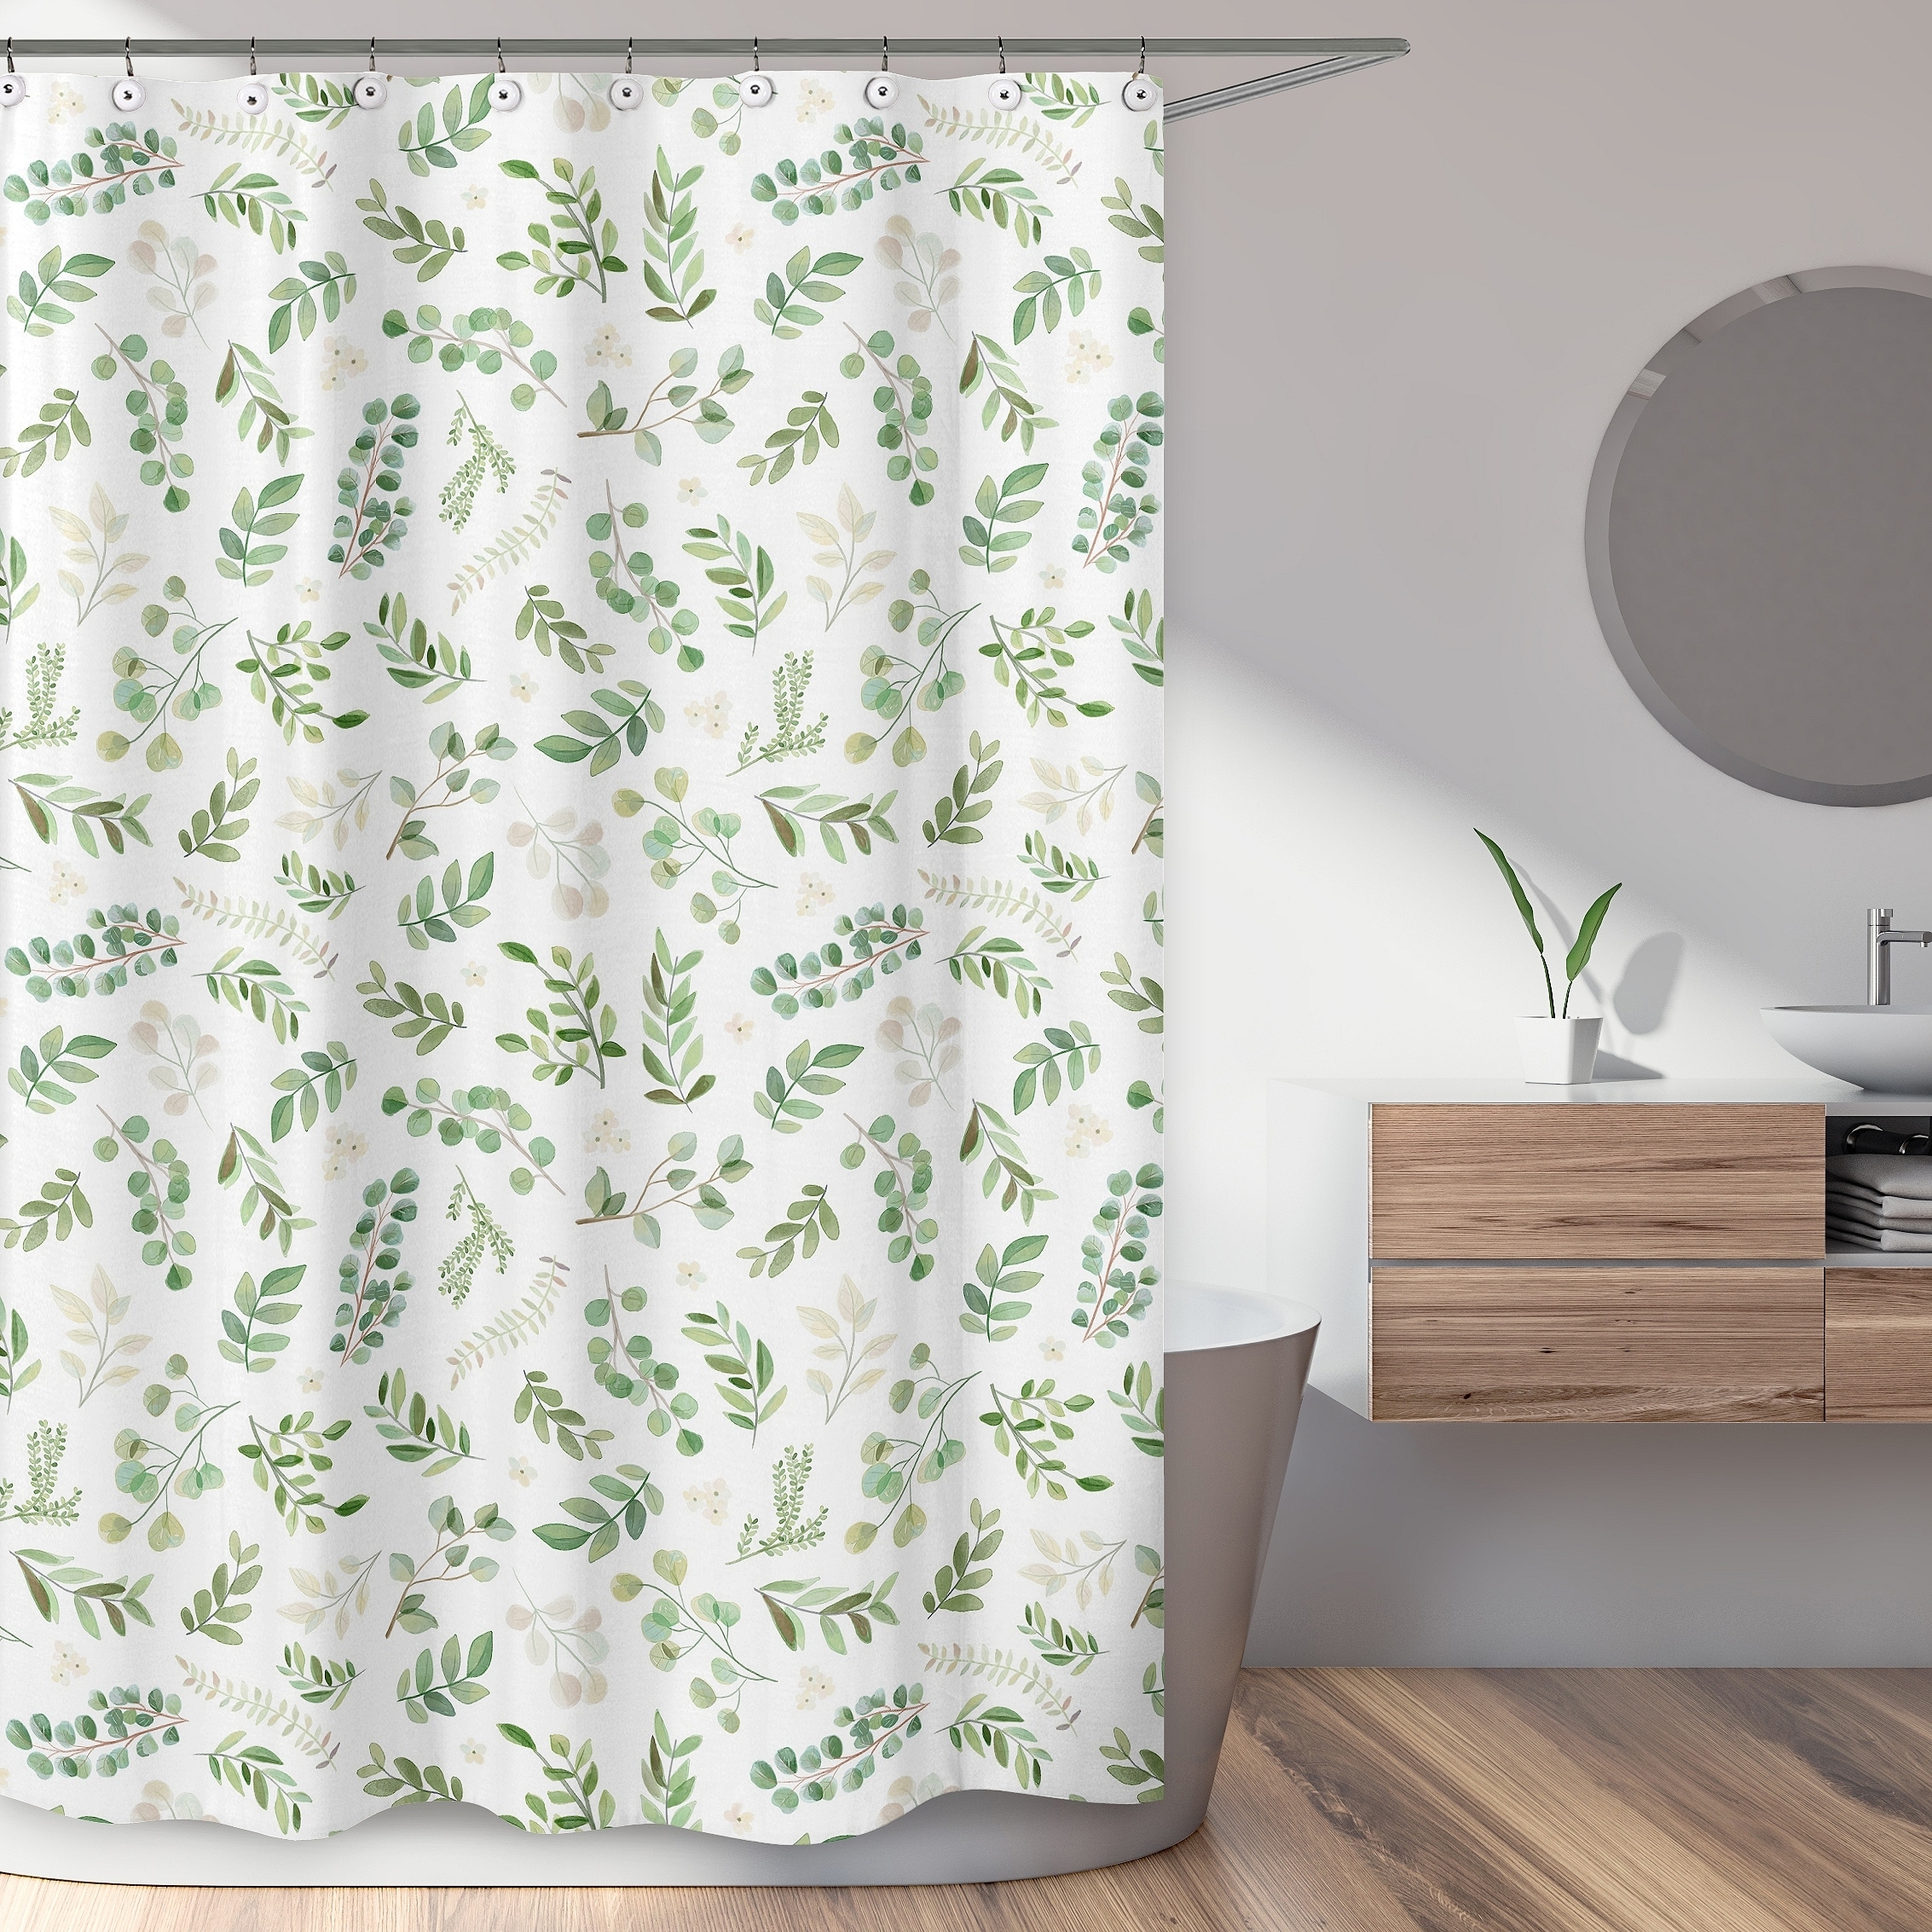 Details about   Watercolor Style Tropical Green Plant Leaves Shower Curtain Set Bathroom Decor 